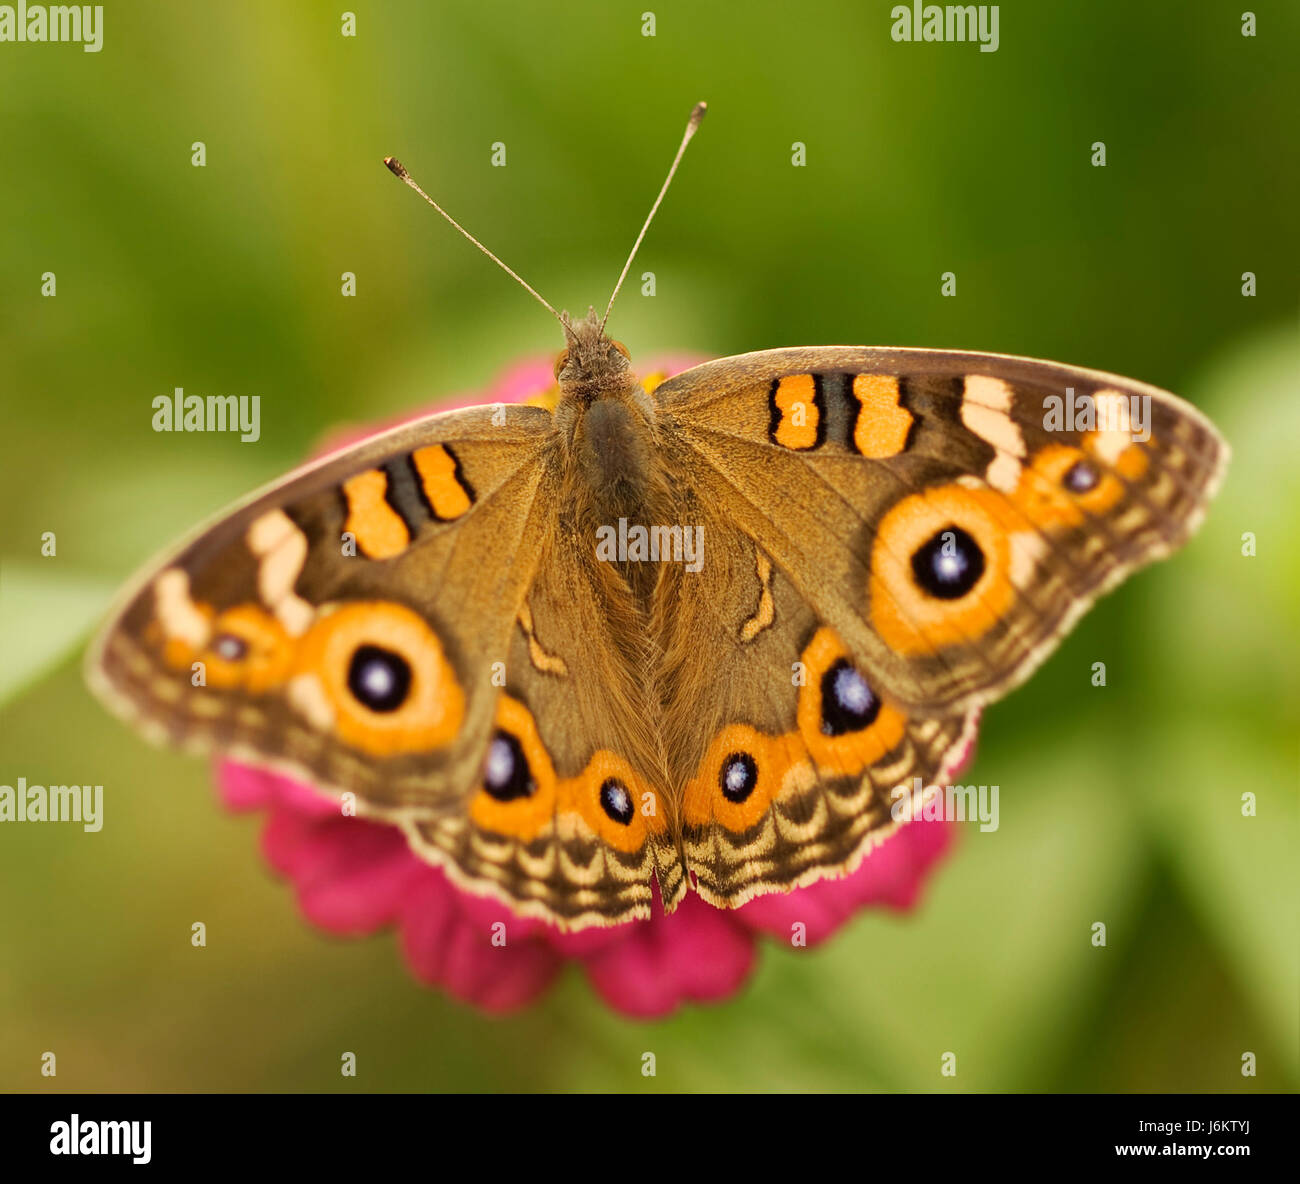 insect butterfly argus meadow fall autumn blue insect brown brownish brunette Stock Photo